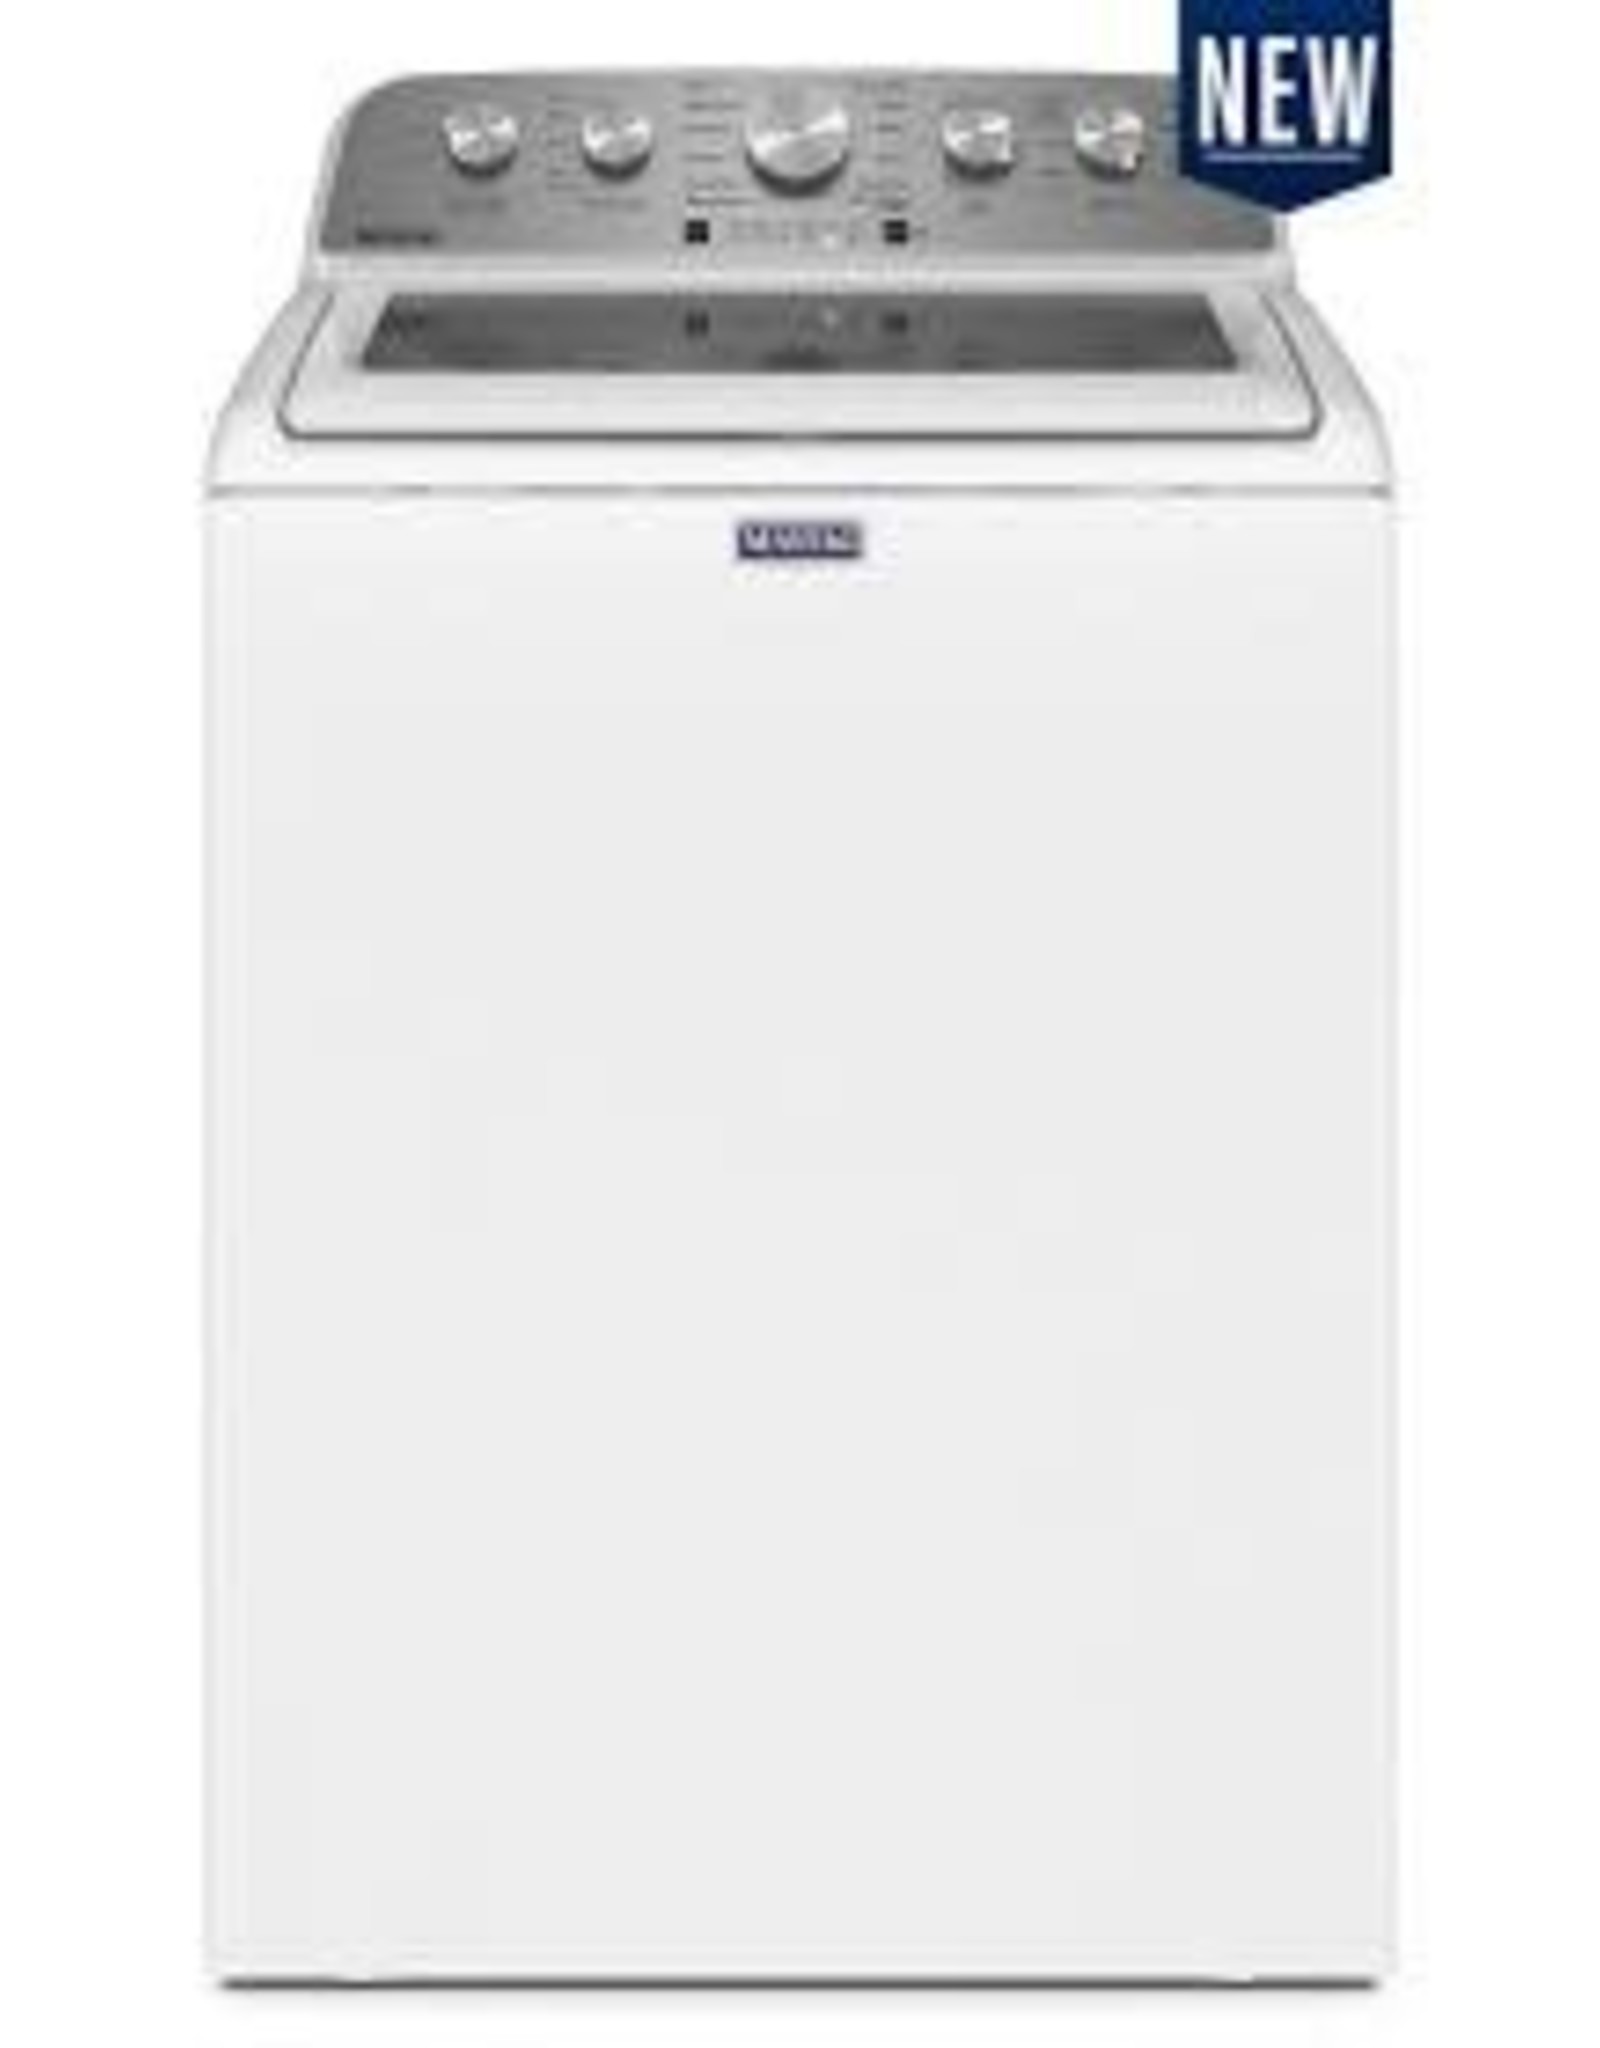 C.k MVW5430MW0 TOP LOAD WASHER WITH EXTRA POWER – 4.8 CU. FT.